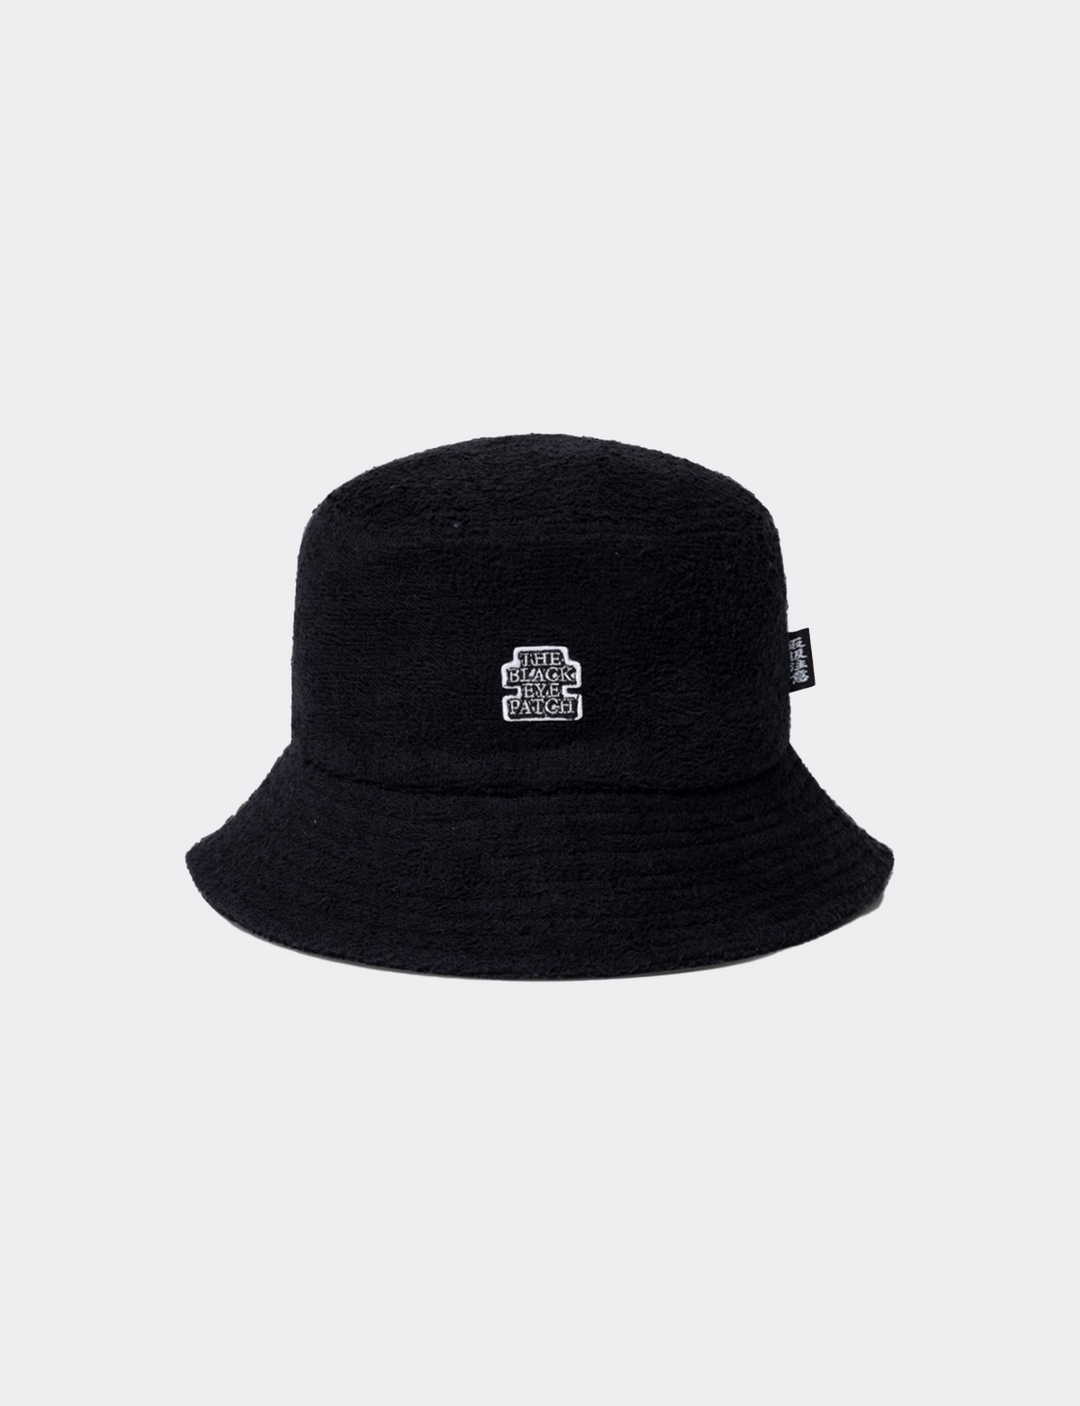 BlackEyePatch - OG LABEL PILE BUCKET HAT – The Contemporary Fix Kyoto